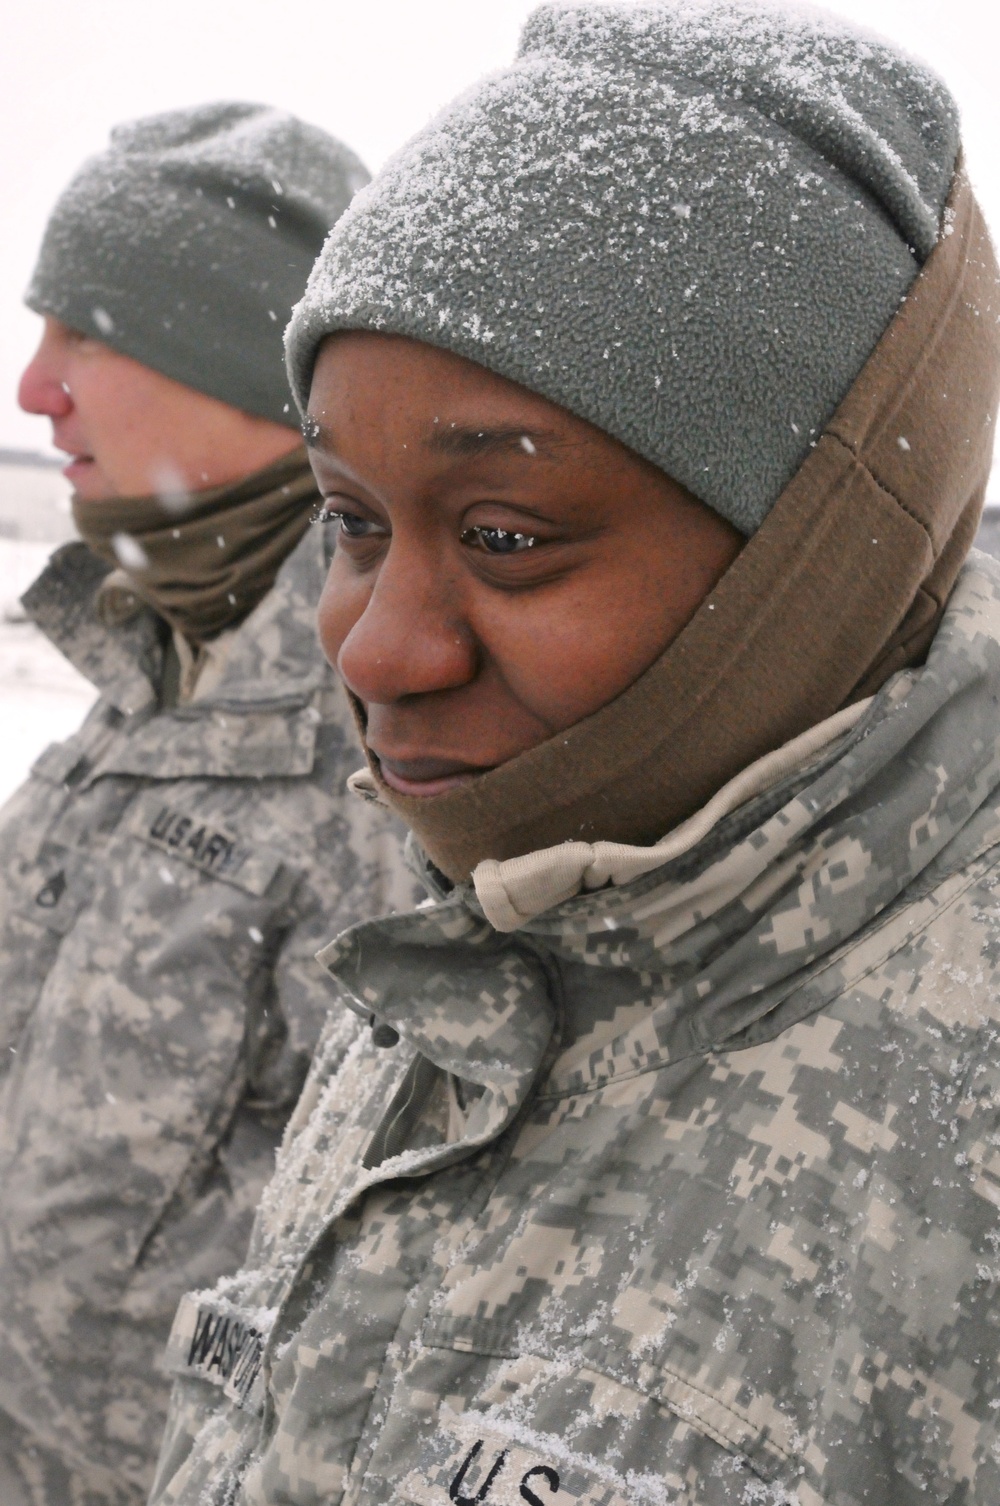 Fort Wainwright military police prepare for Arctic winter temperatures